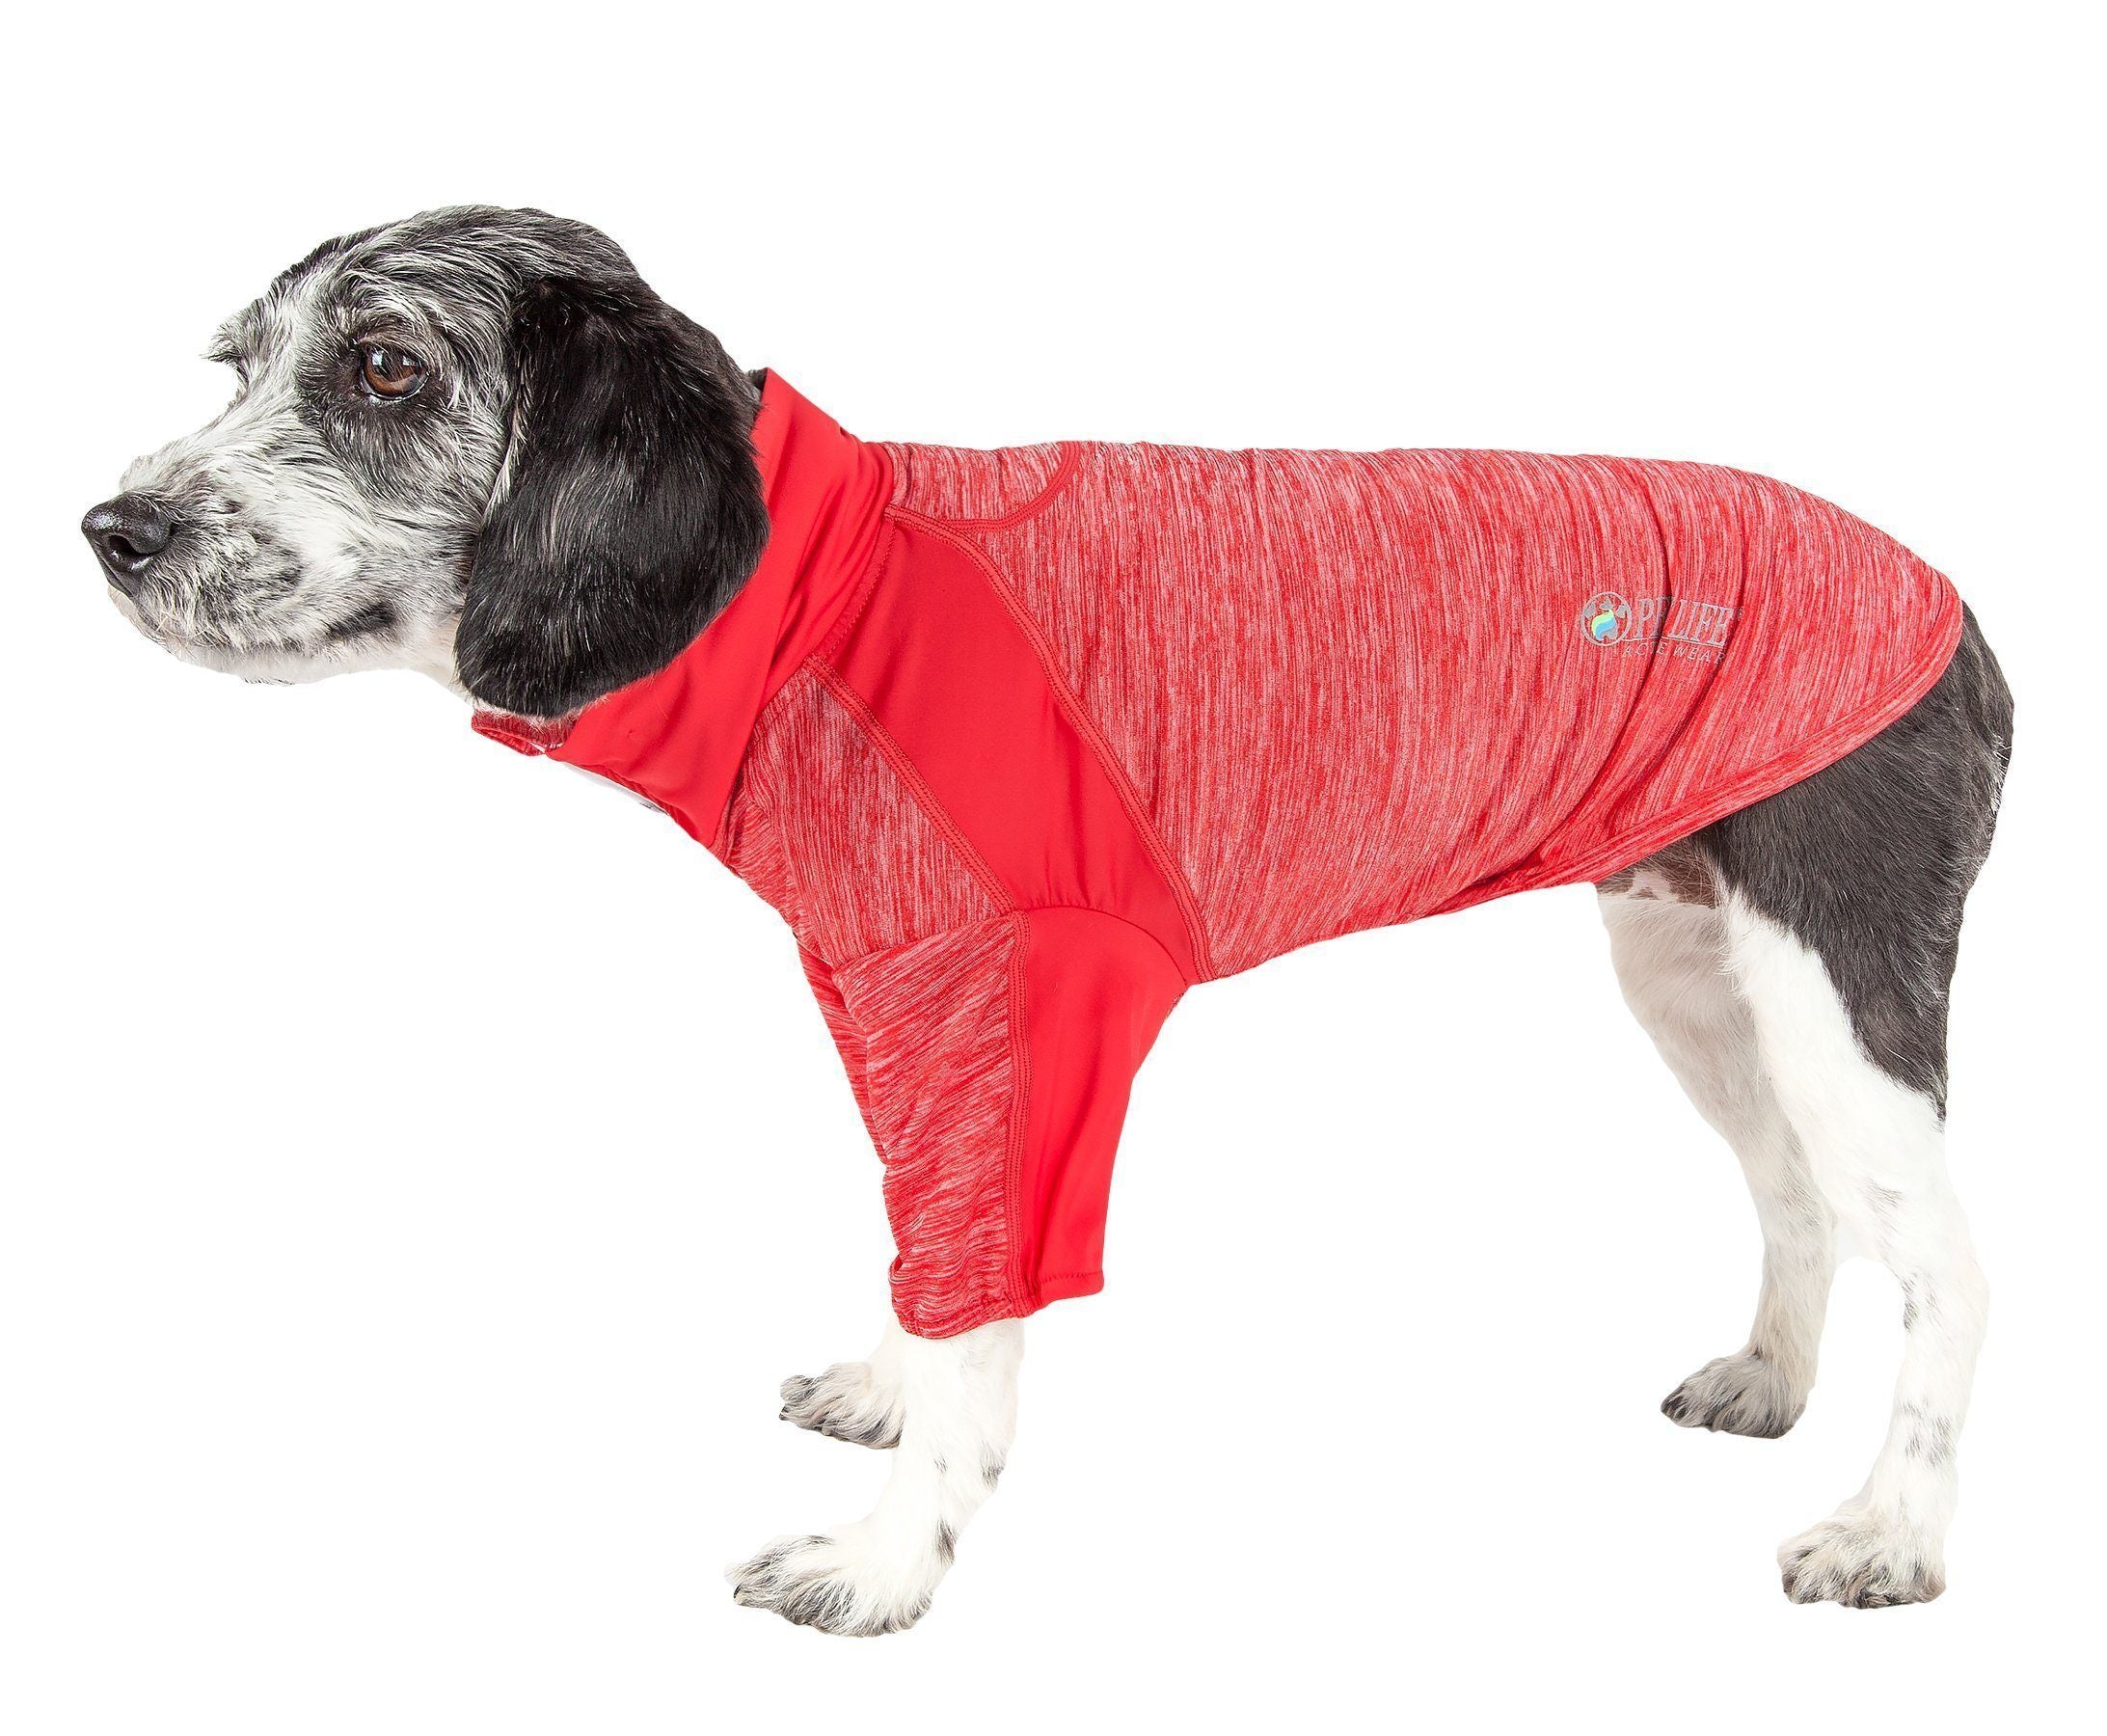 Pet Life ® Active 'Chewitt Wagassy' 4-Way-Stretch Yoga Fitness Long-Sleeve Dog T-Shirt X-Small Red